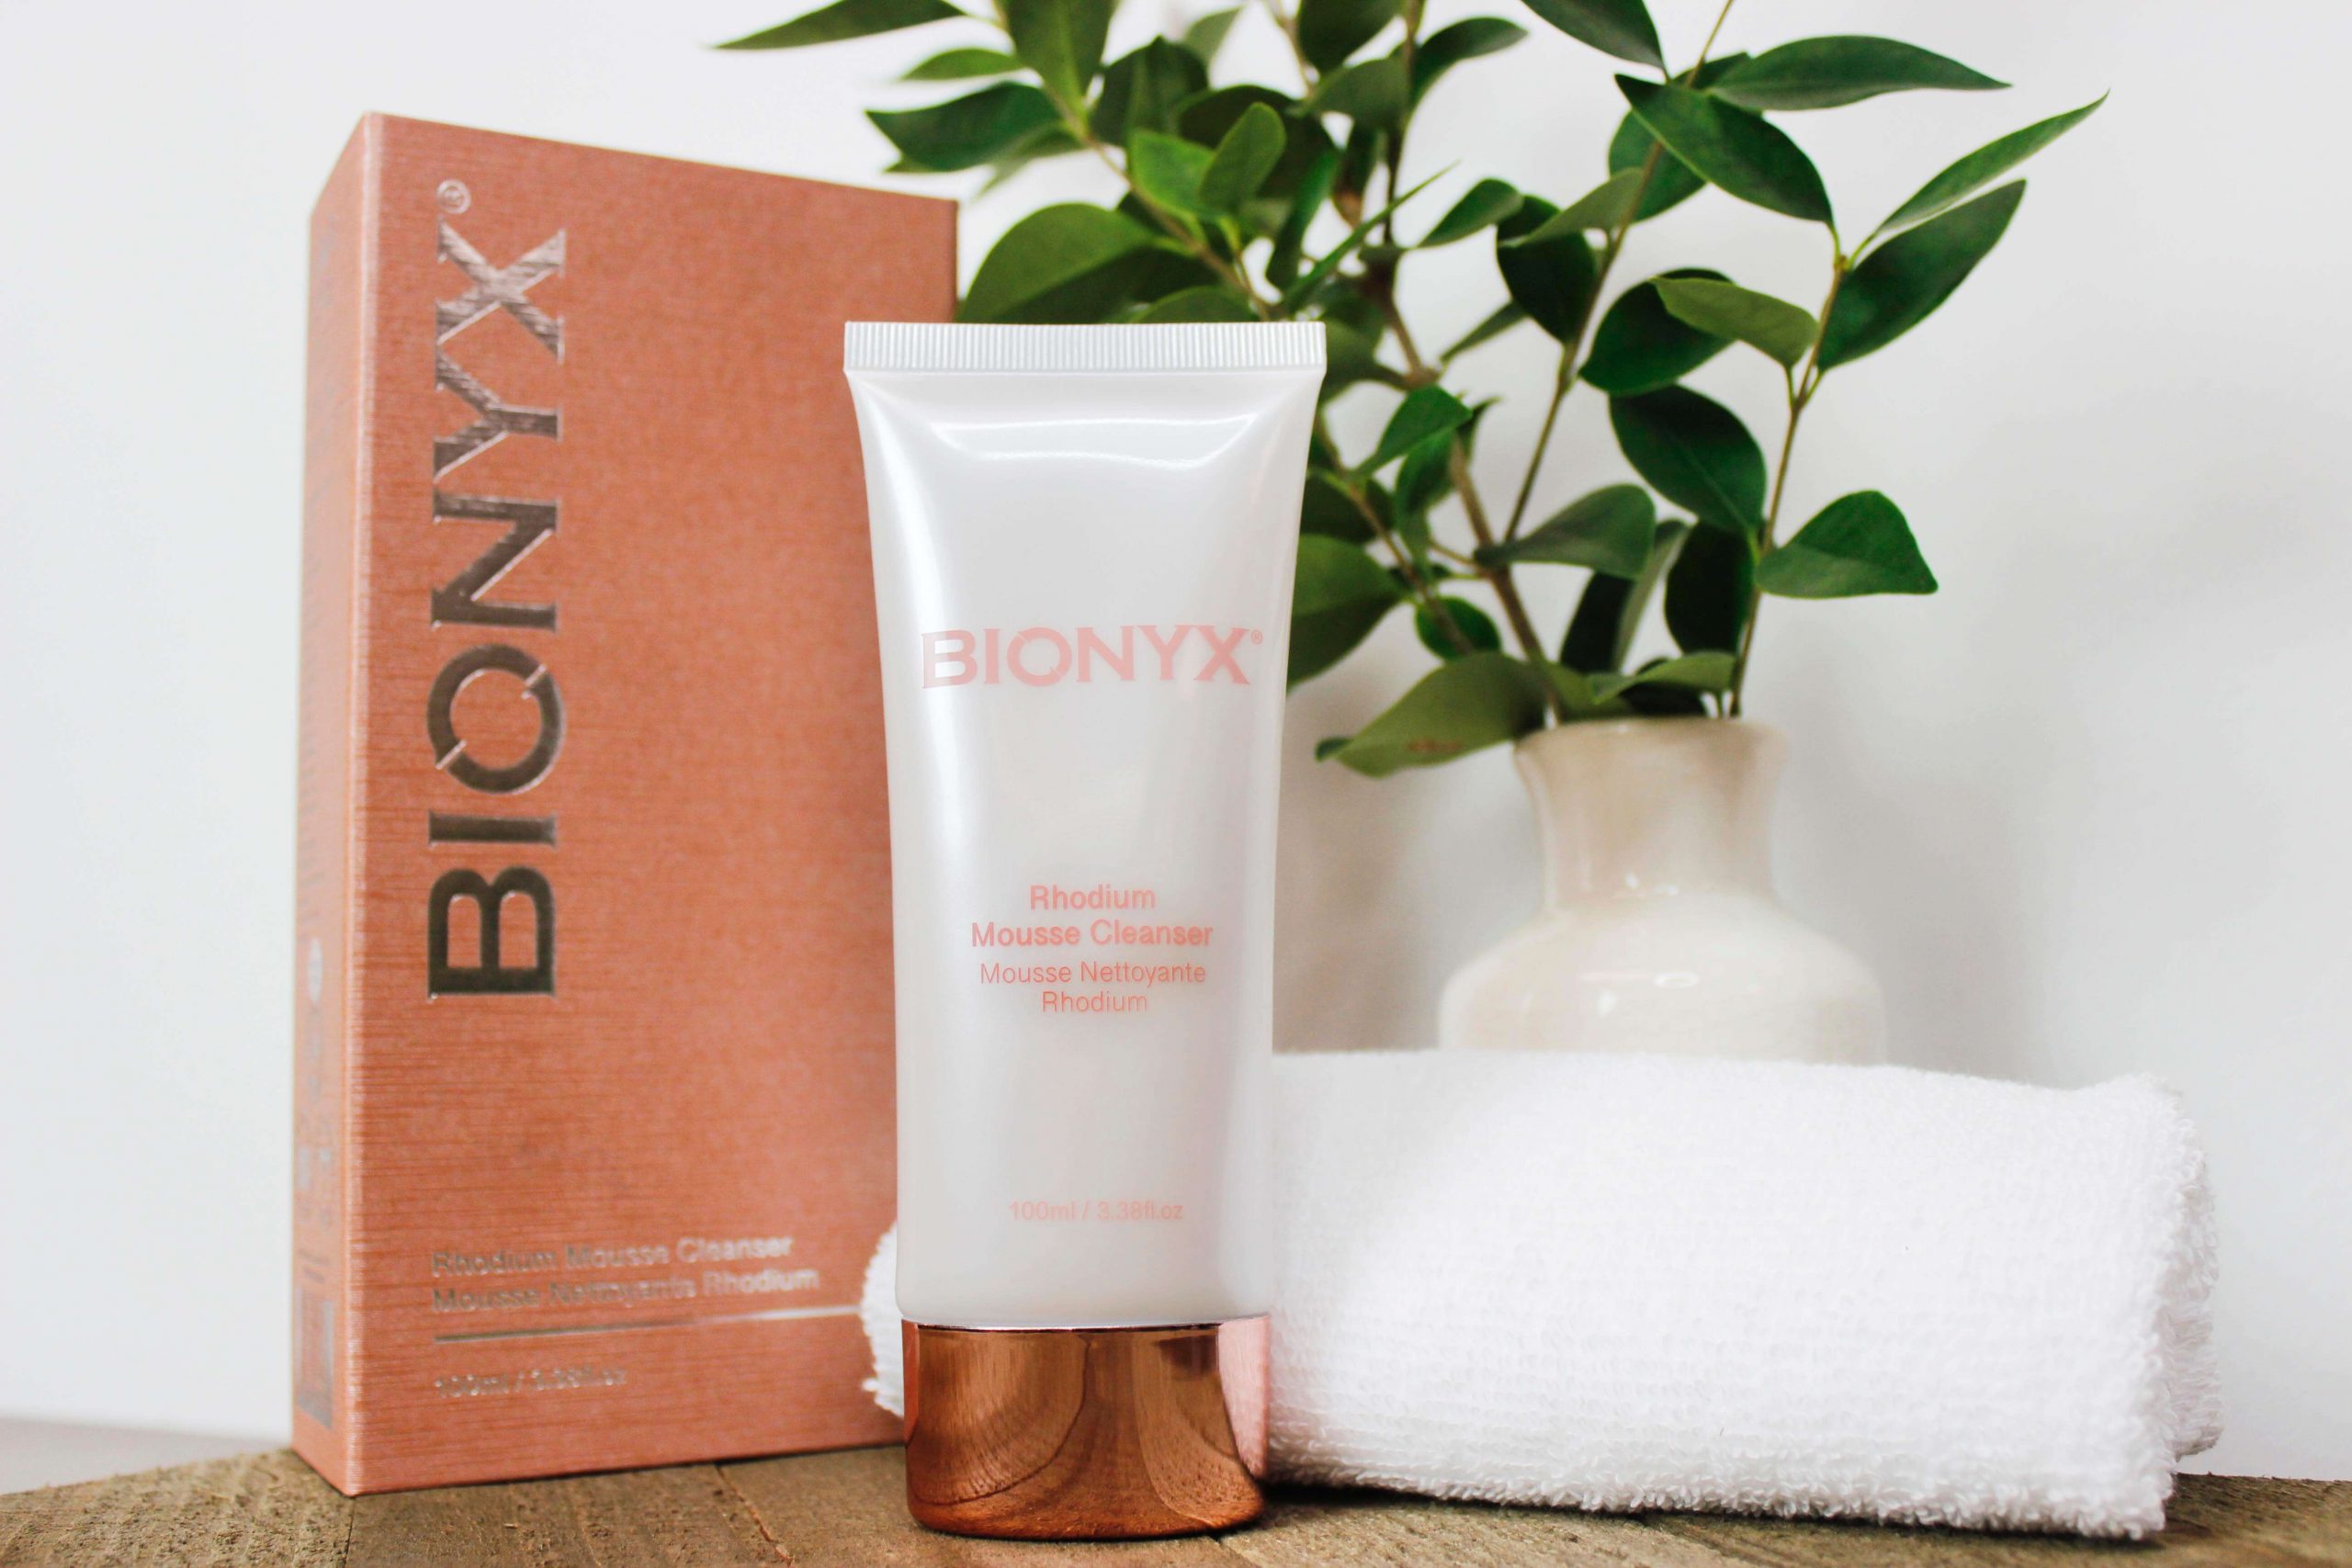 Bionyx cleanser to be used before facial peeling